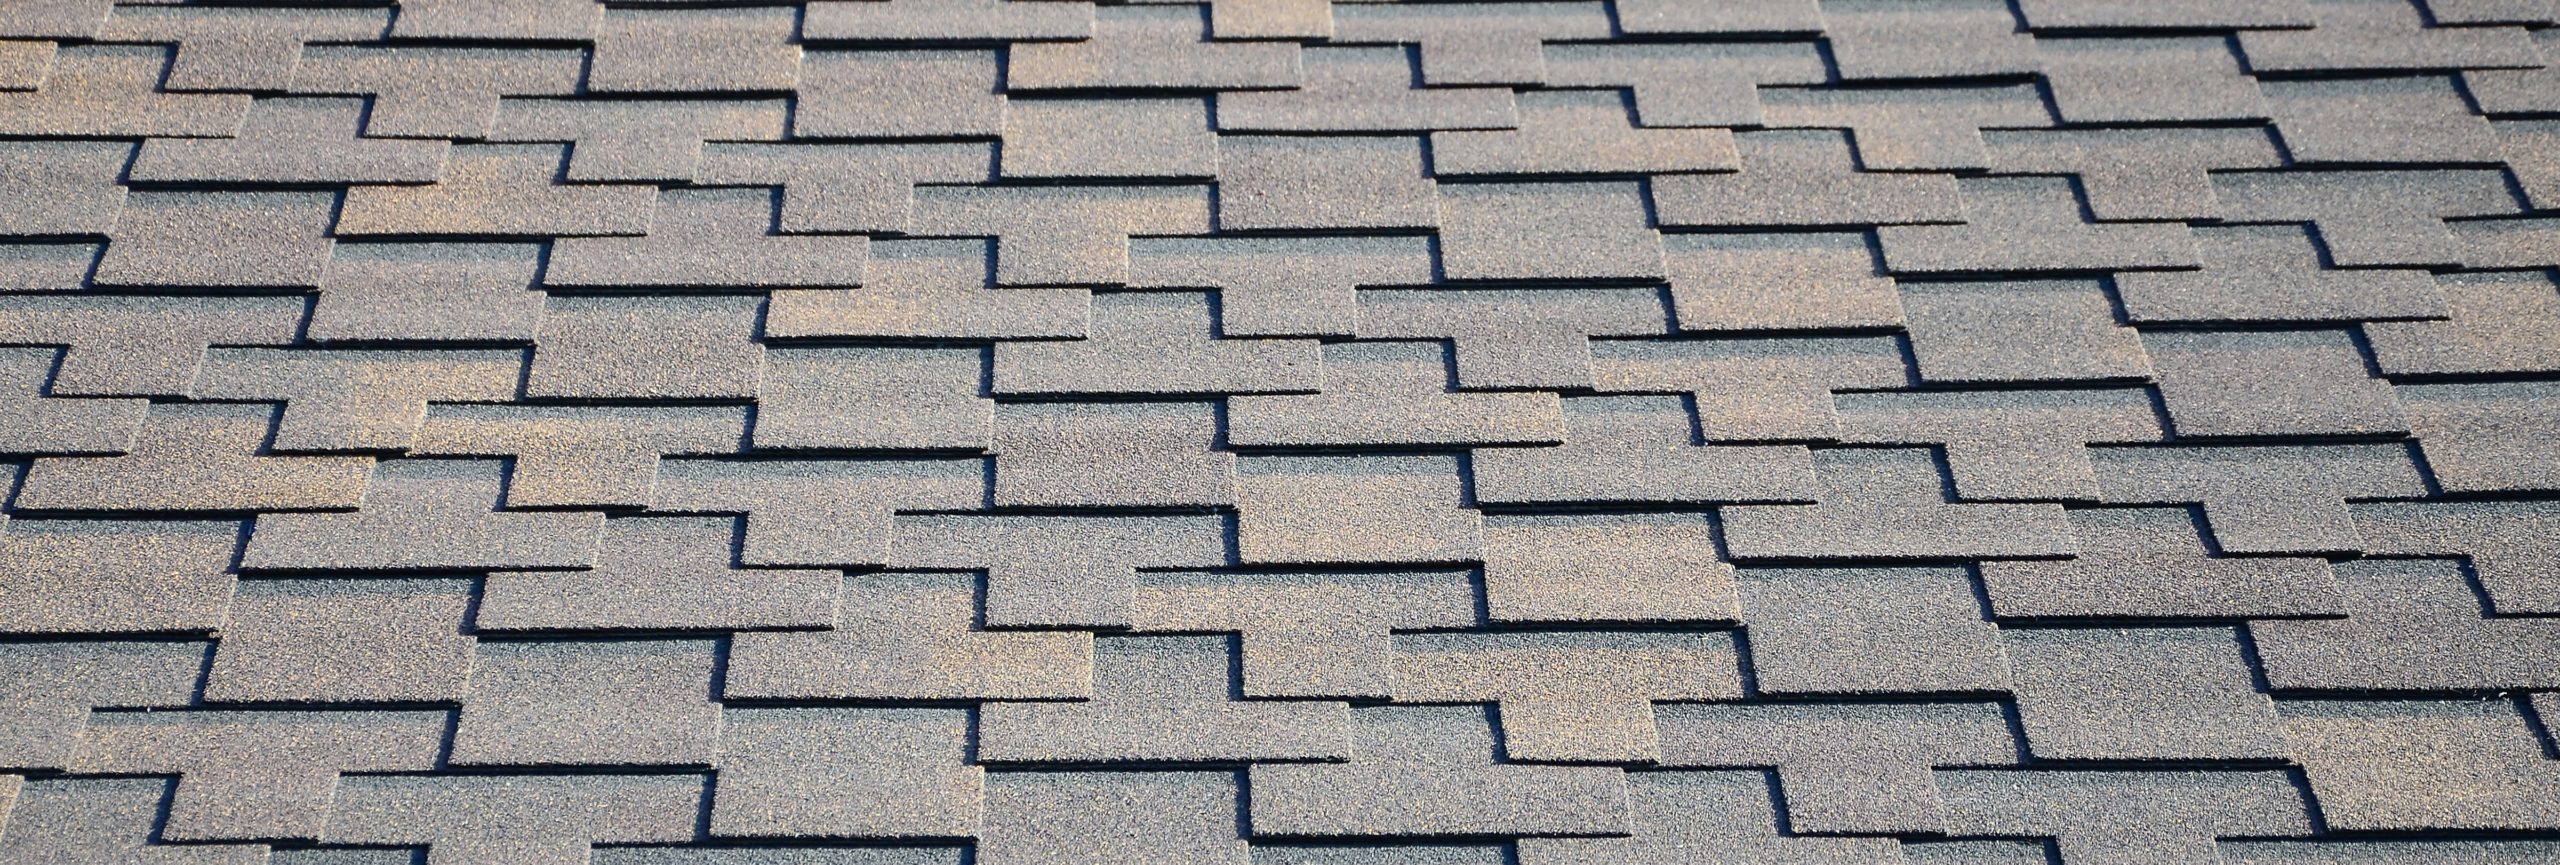 Your Questions About a New Roof, Answered